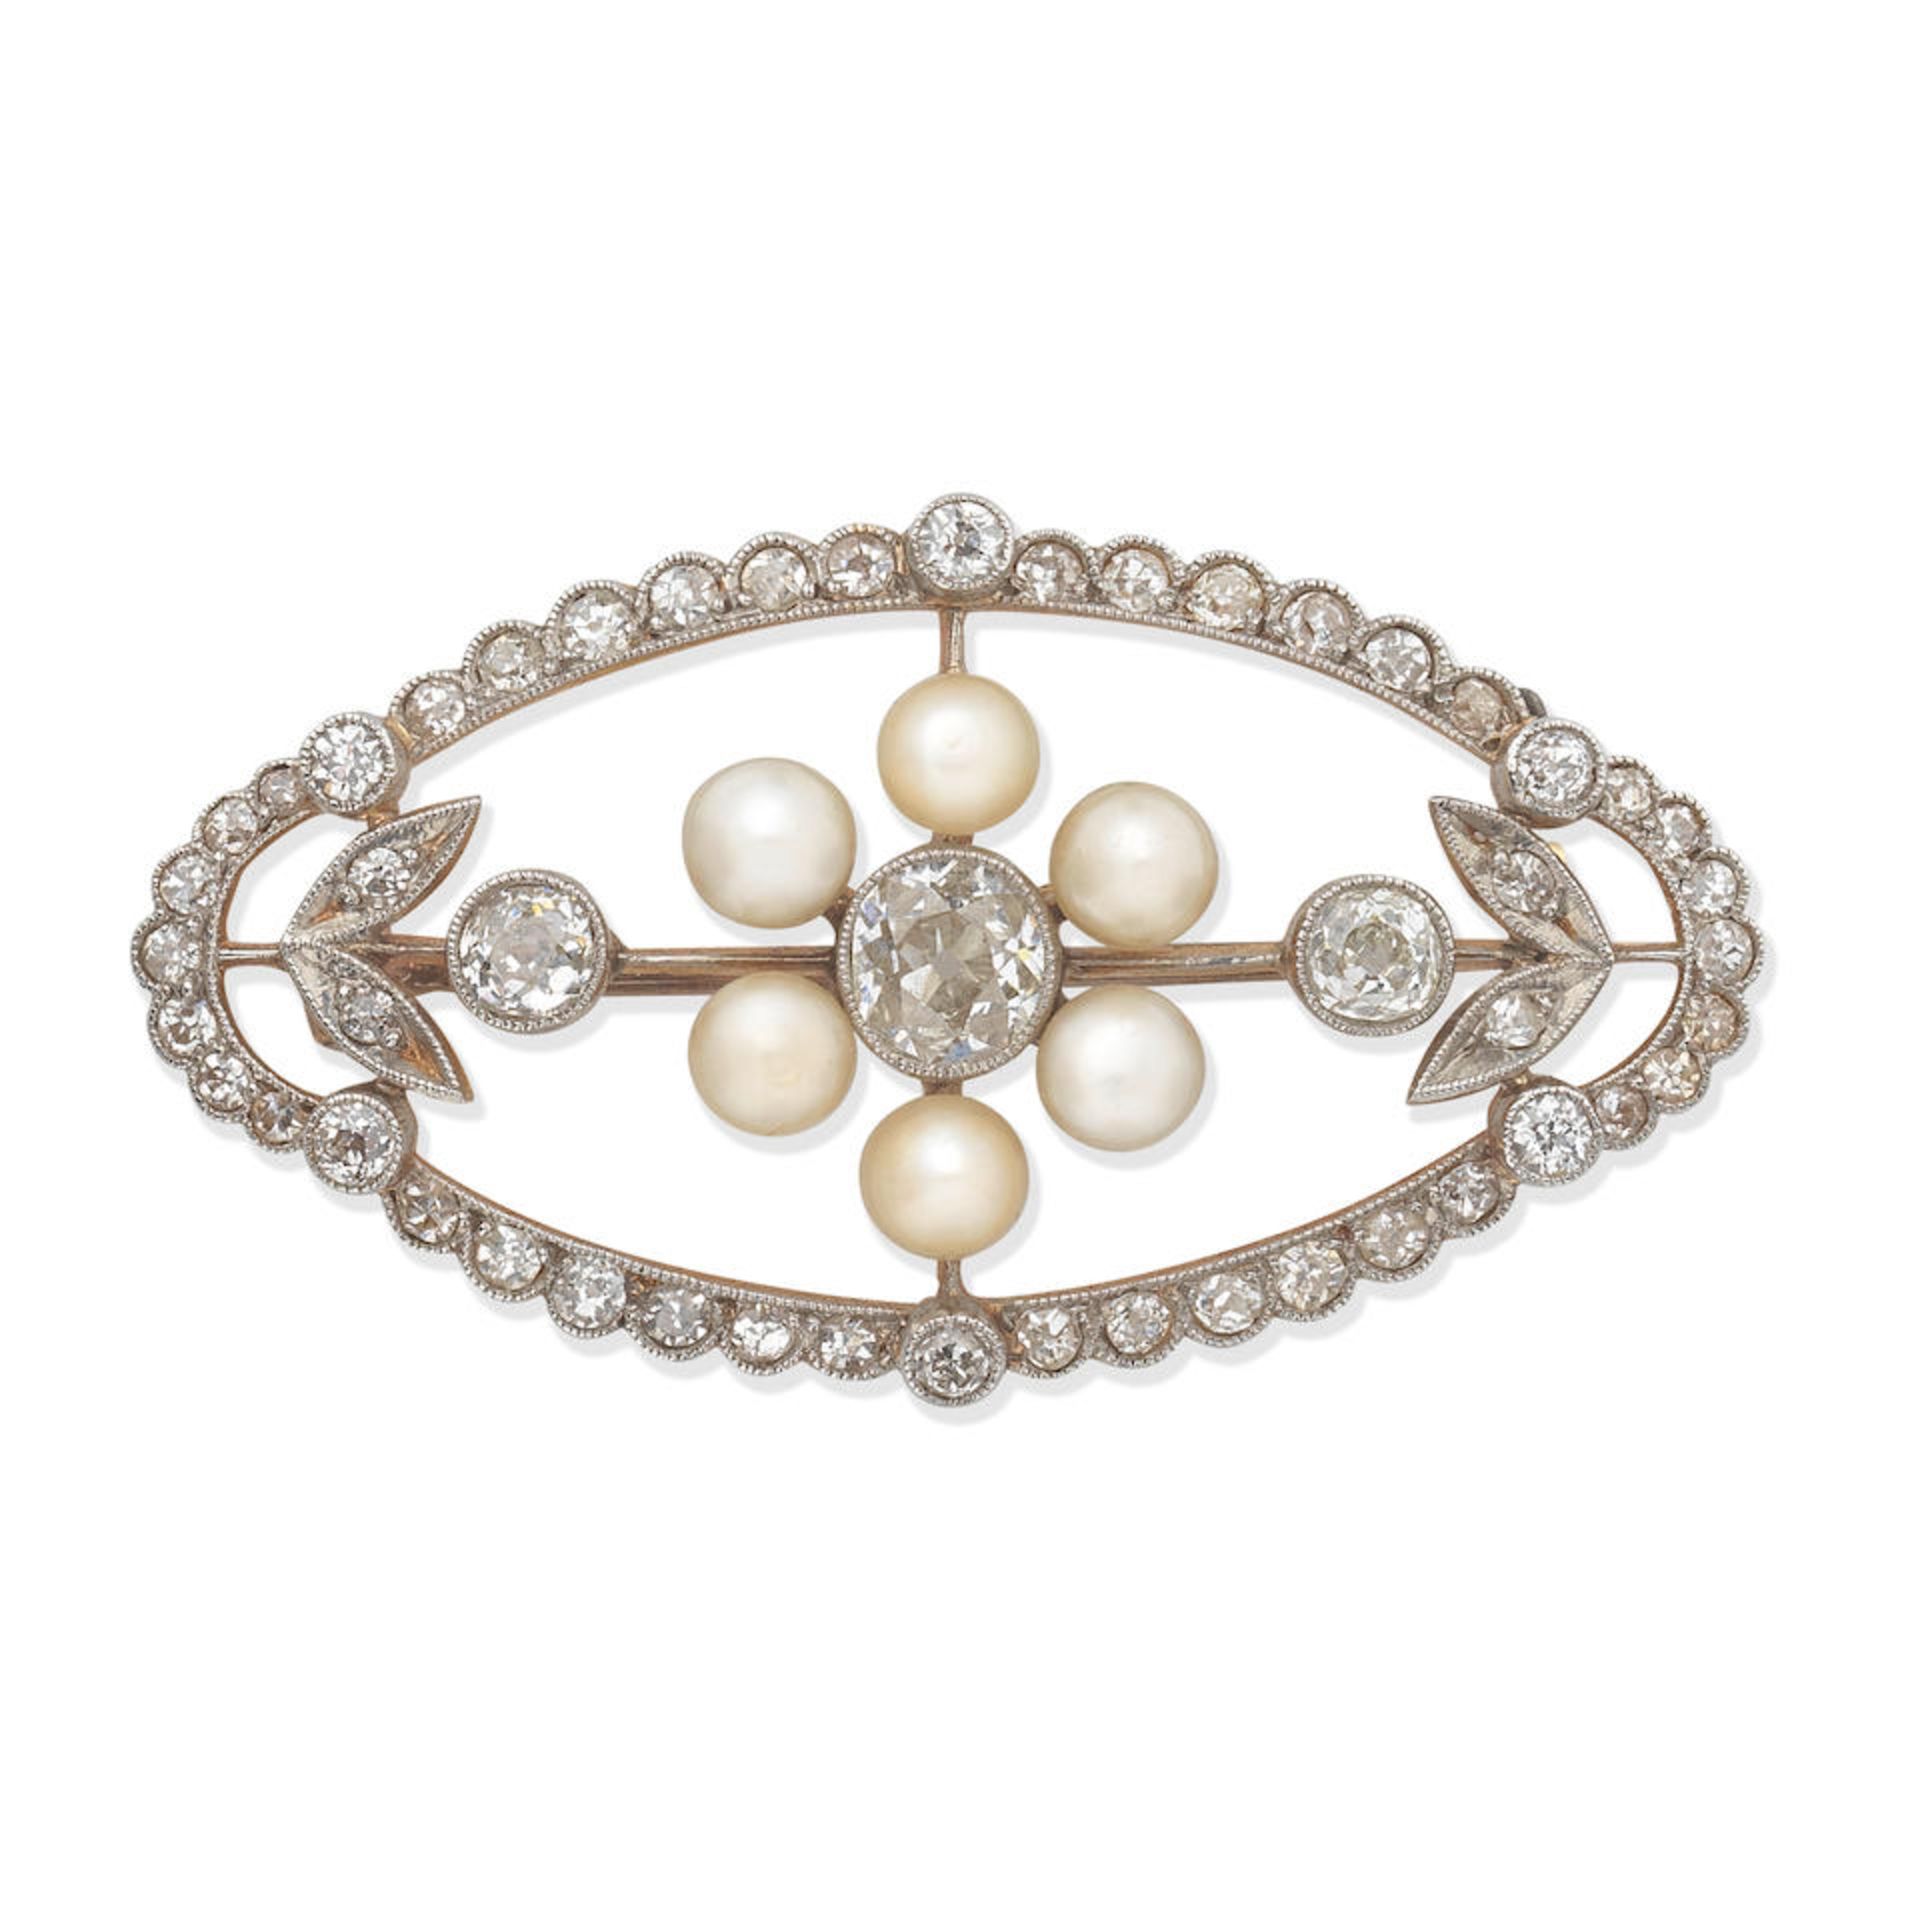 CULTURED PEARL AND DIAMOND BROOCH